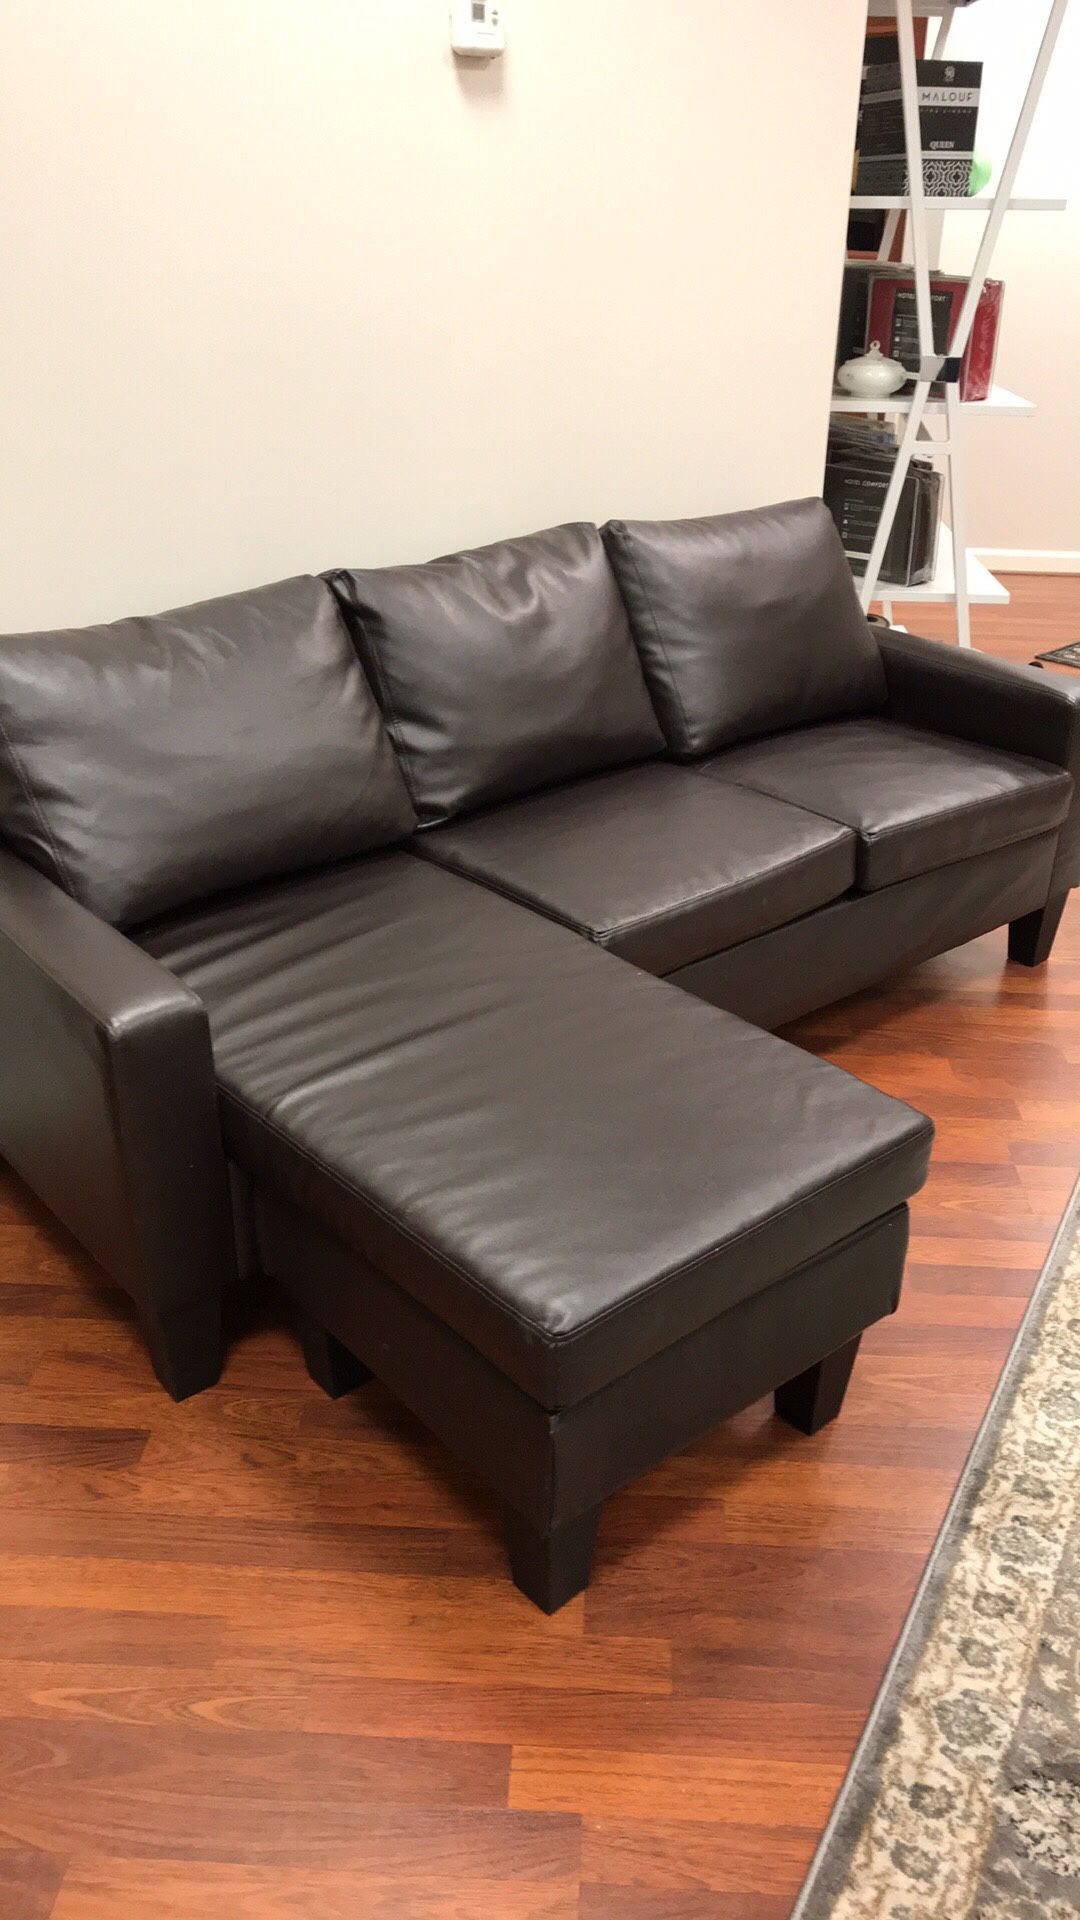 Small couch and ottoman